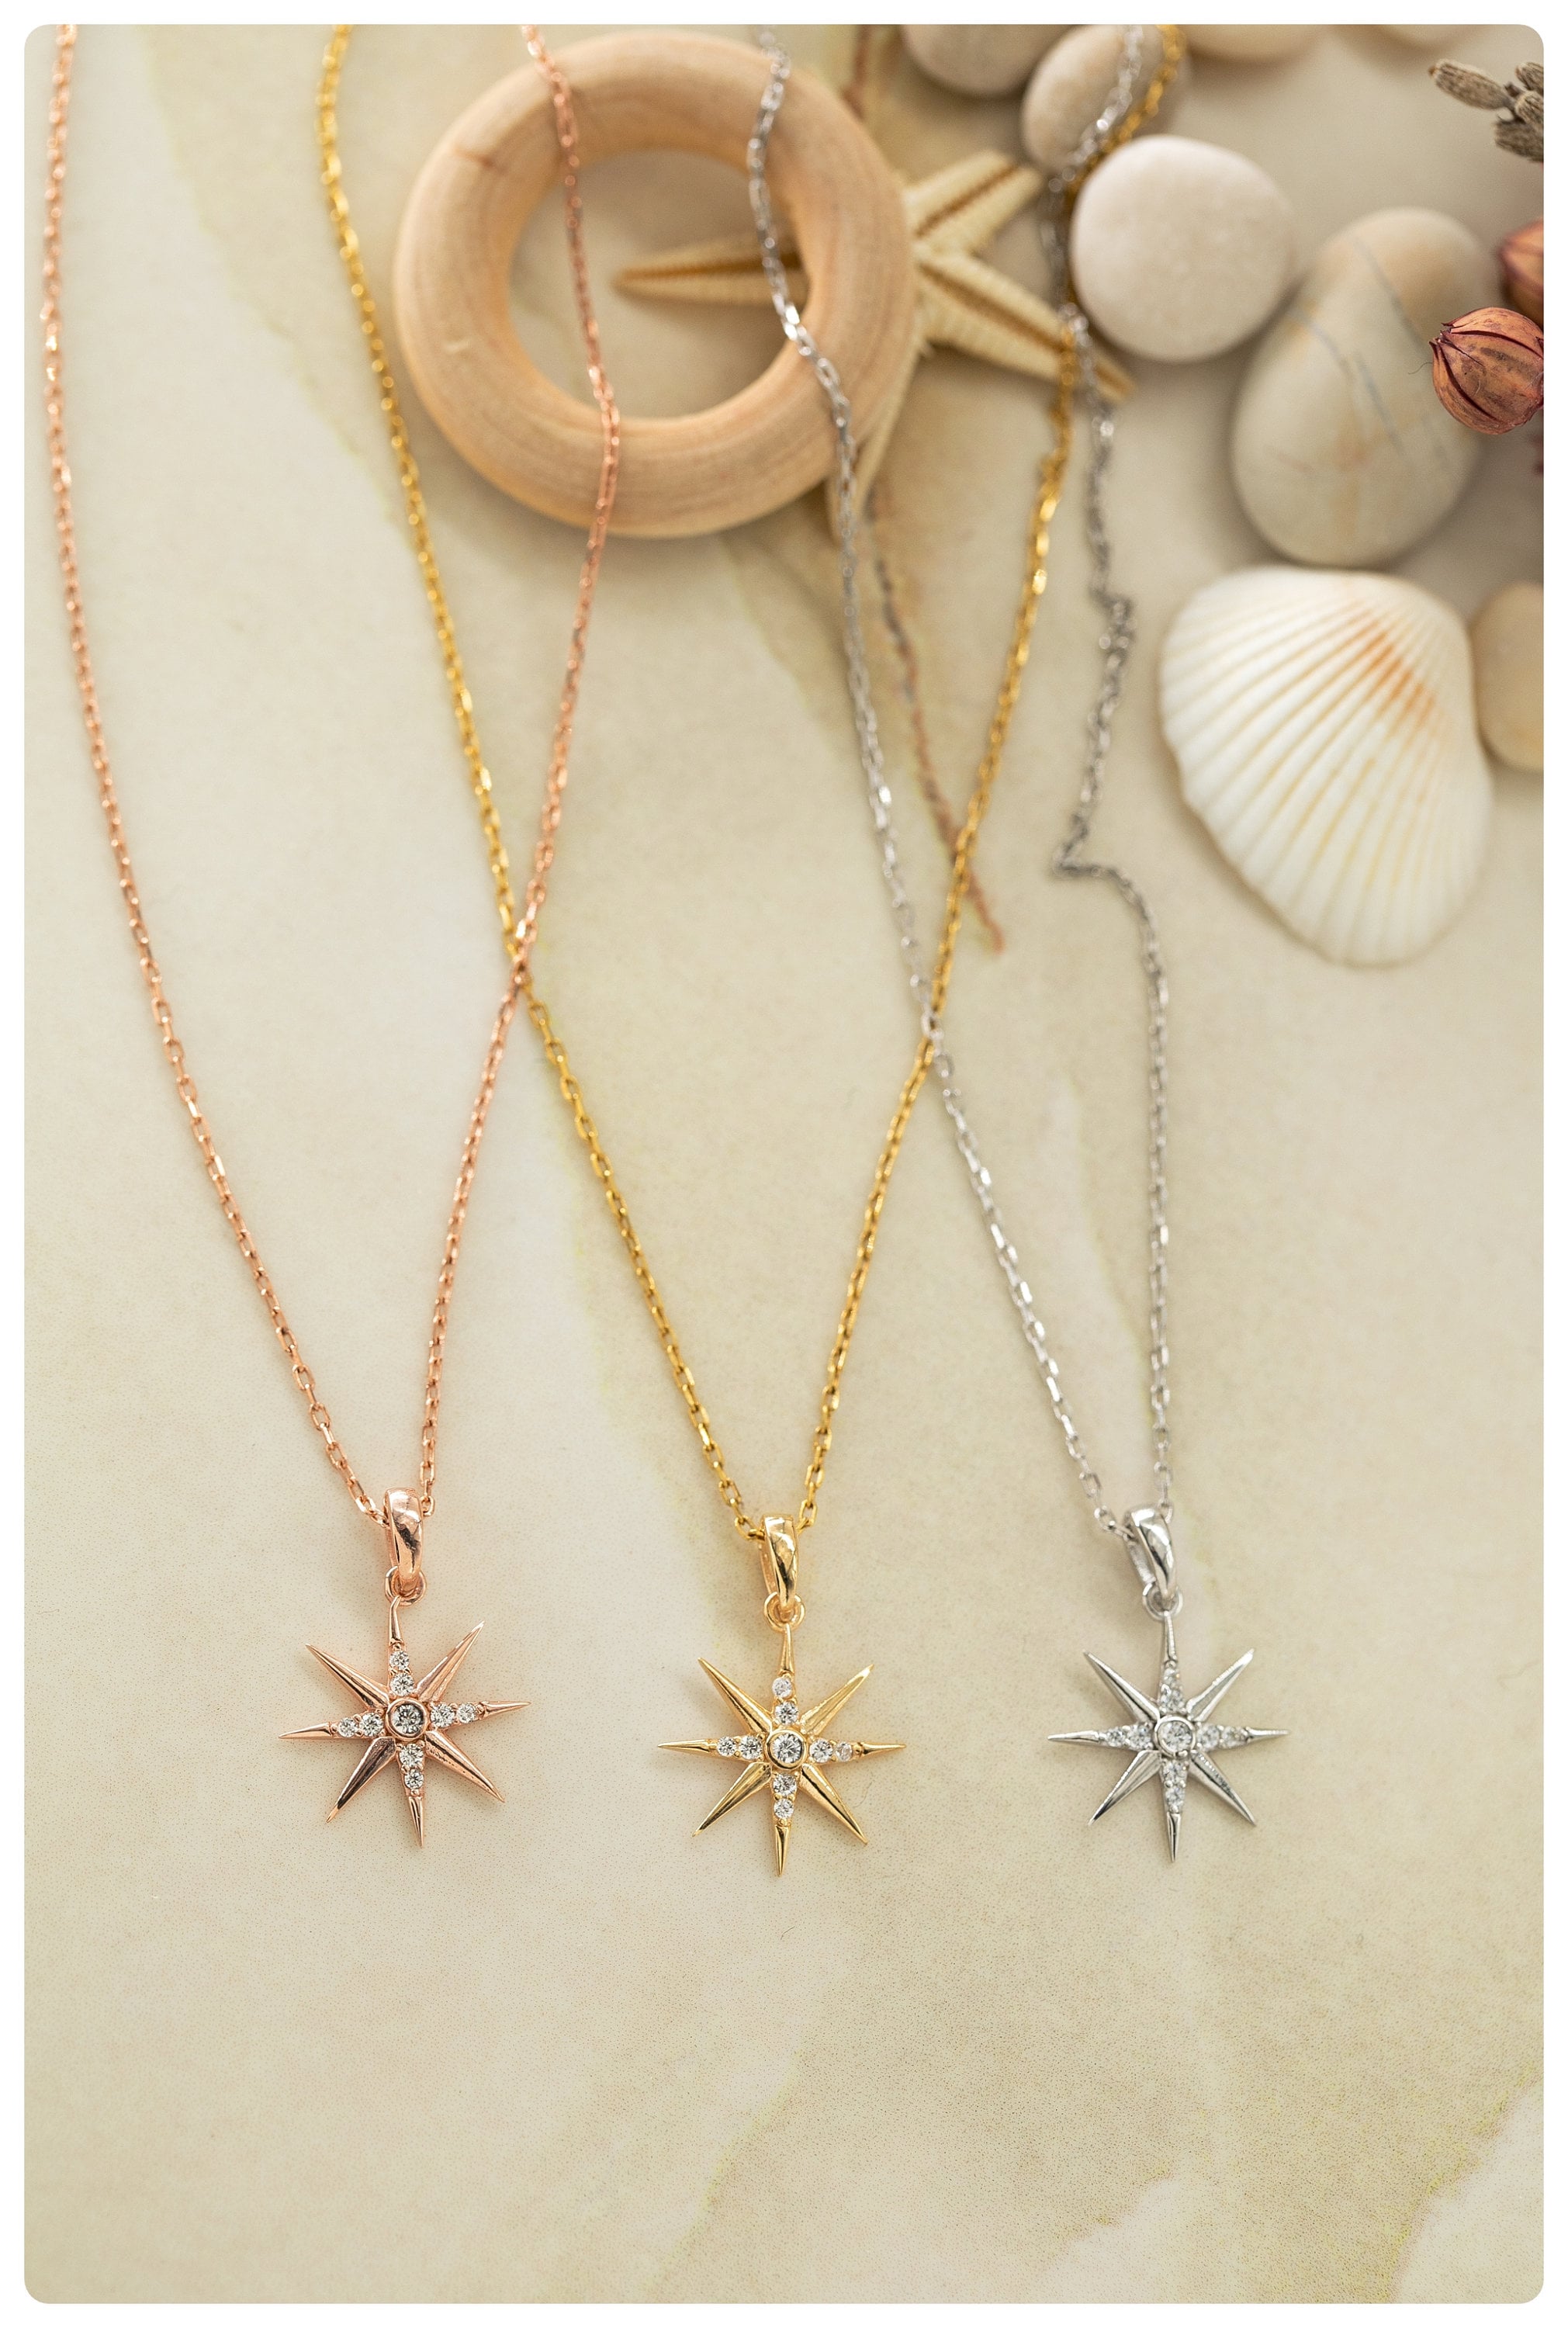 14k Gold North Star Necklace, With Diamond Star Necklace, Starburst North Star Pendant, Celestial North Star, 925 Silver Star Necklace